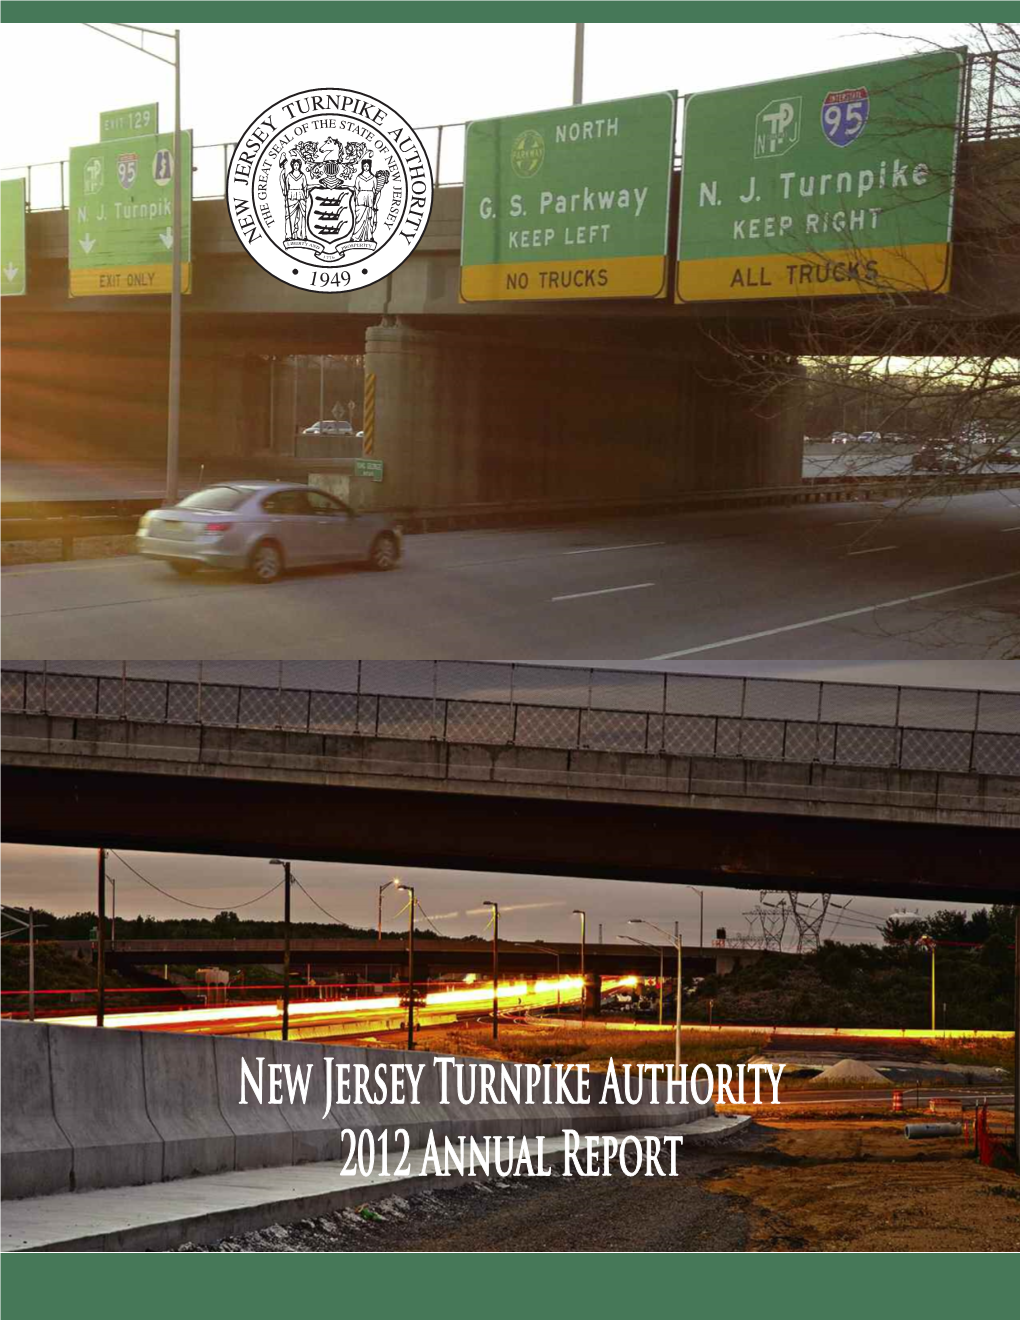 New Jersey Turnpike Authority 2012 Annual Report Table of Contents